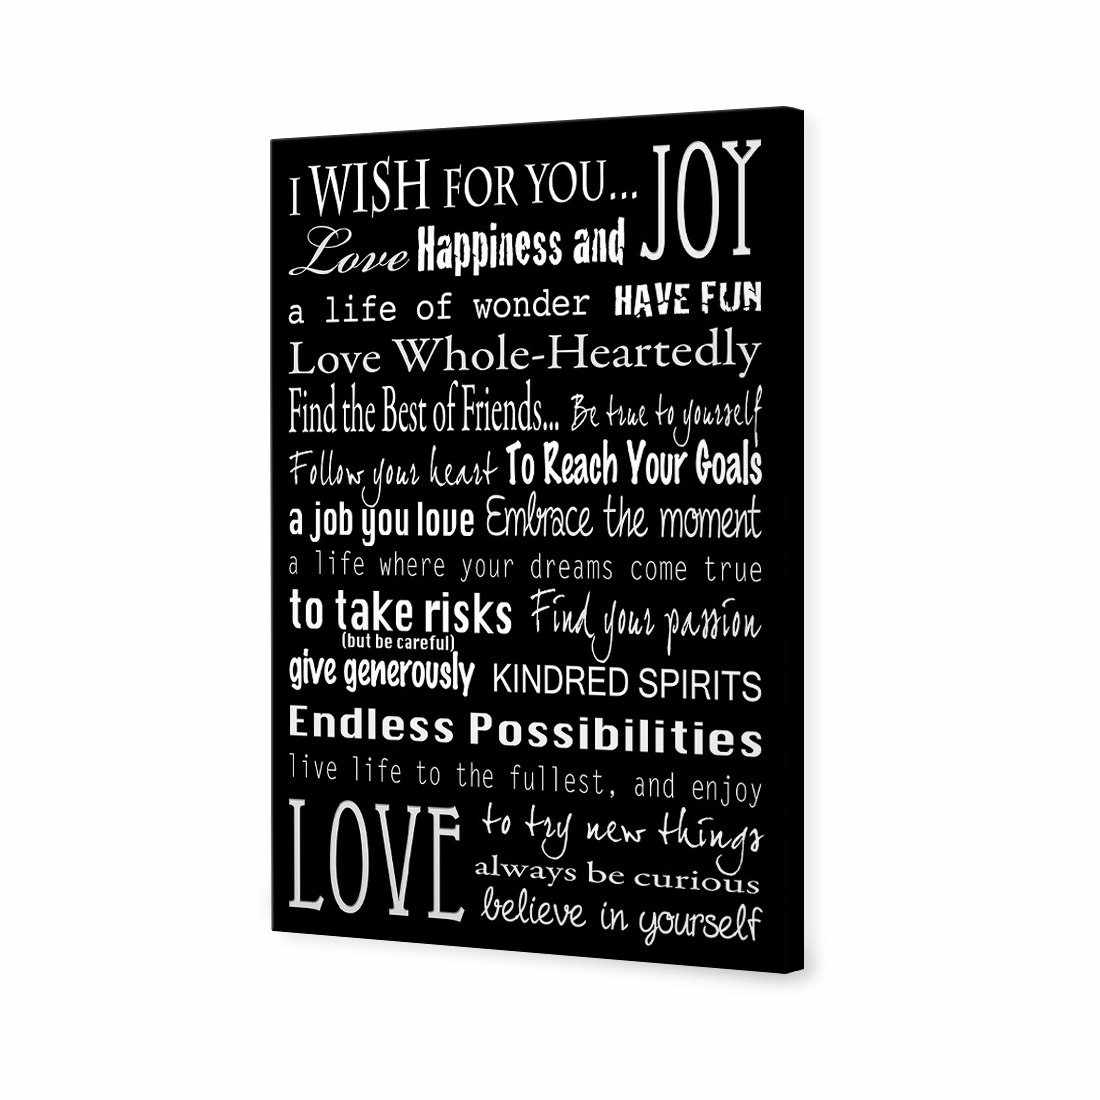 I Wish For You, B&W Canvas Art-Canvas-Wall Art Designs-45x30cm-Canvas - No Frame-Wall Art Designs